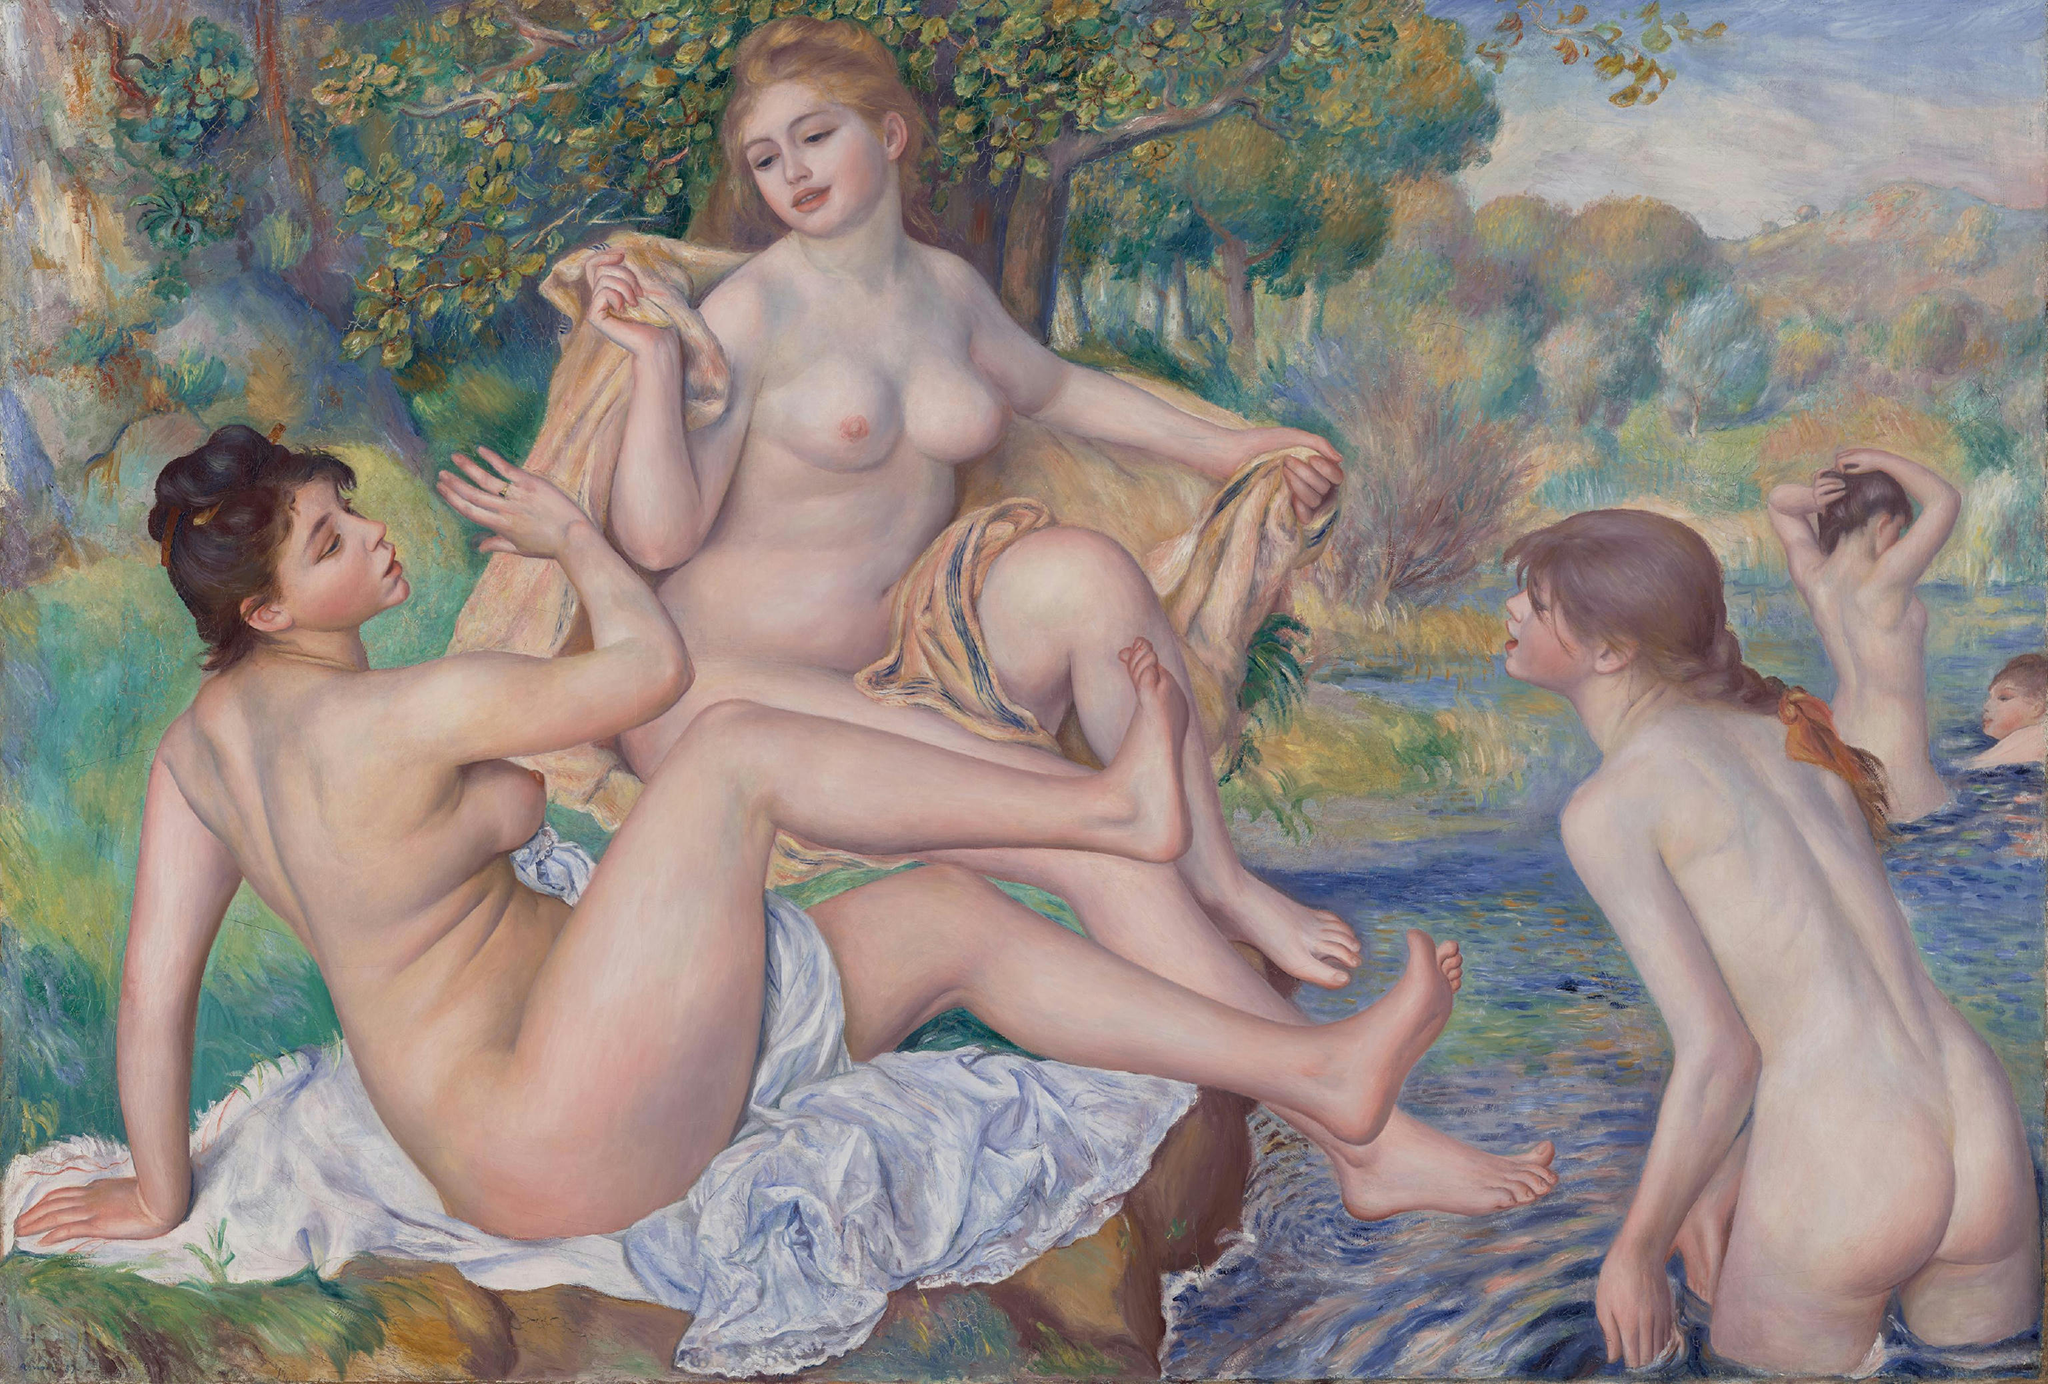 A painting depicting two nude women sitting on their towels on the edge of a river. To the right of them another naked woman stands in the water facing them. Behind her, there are other women cleaning themselves in the water. In the background there is a forest full of green trees.